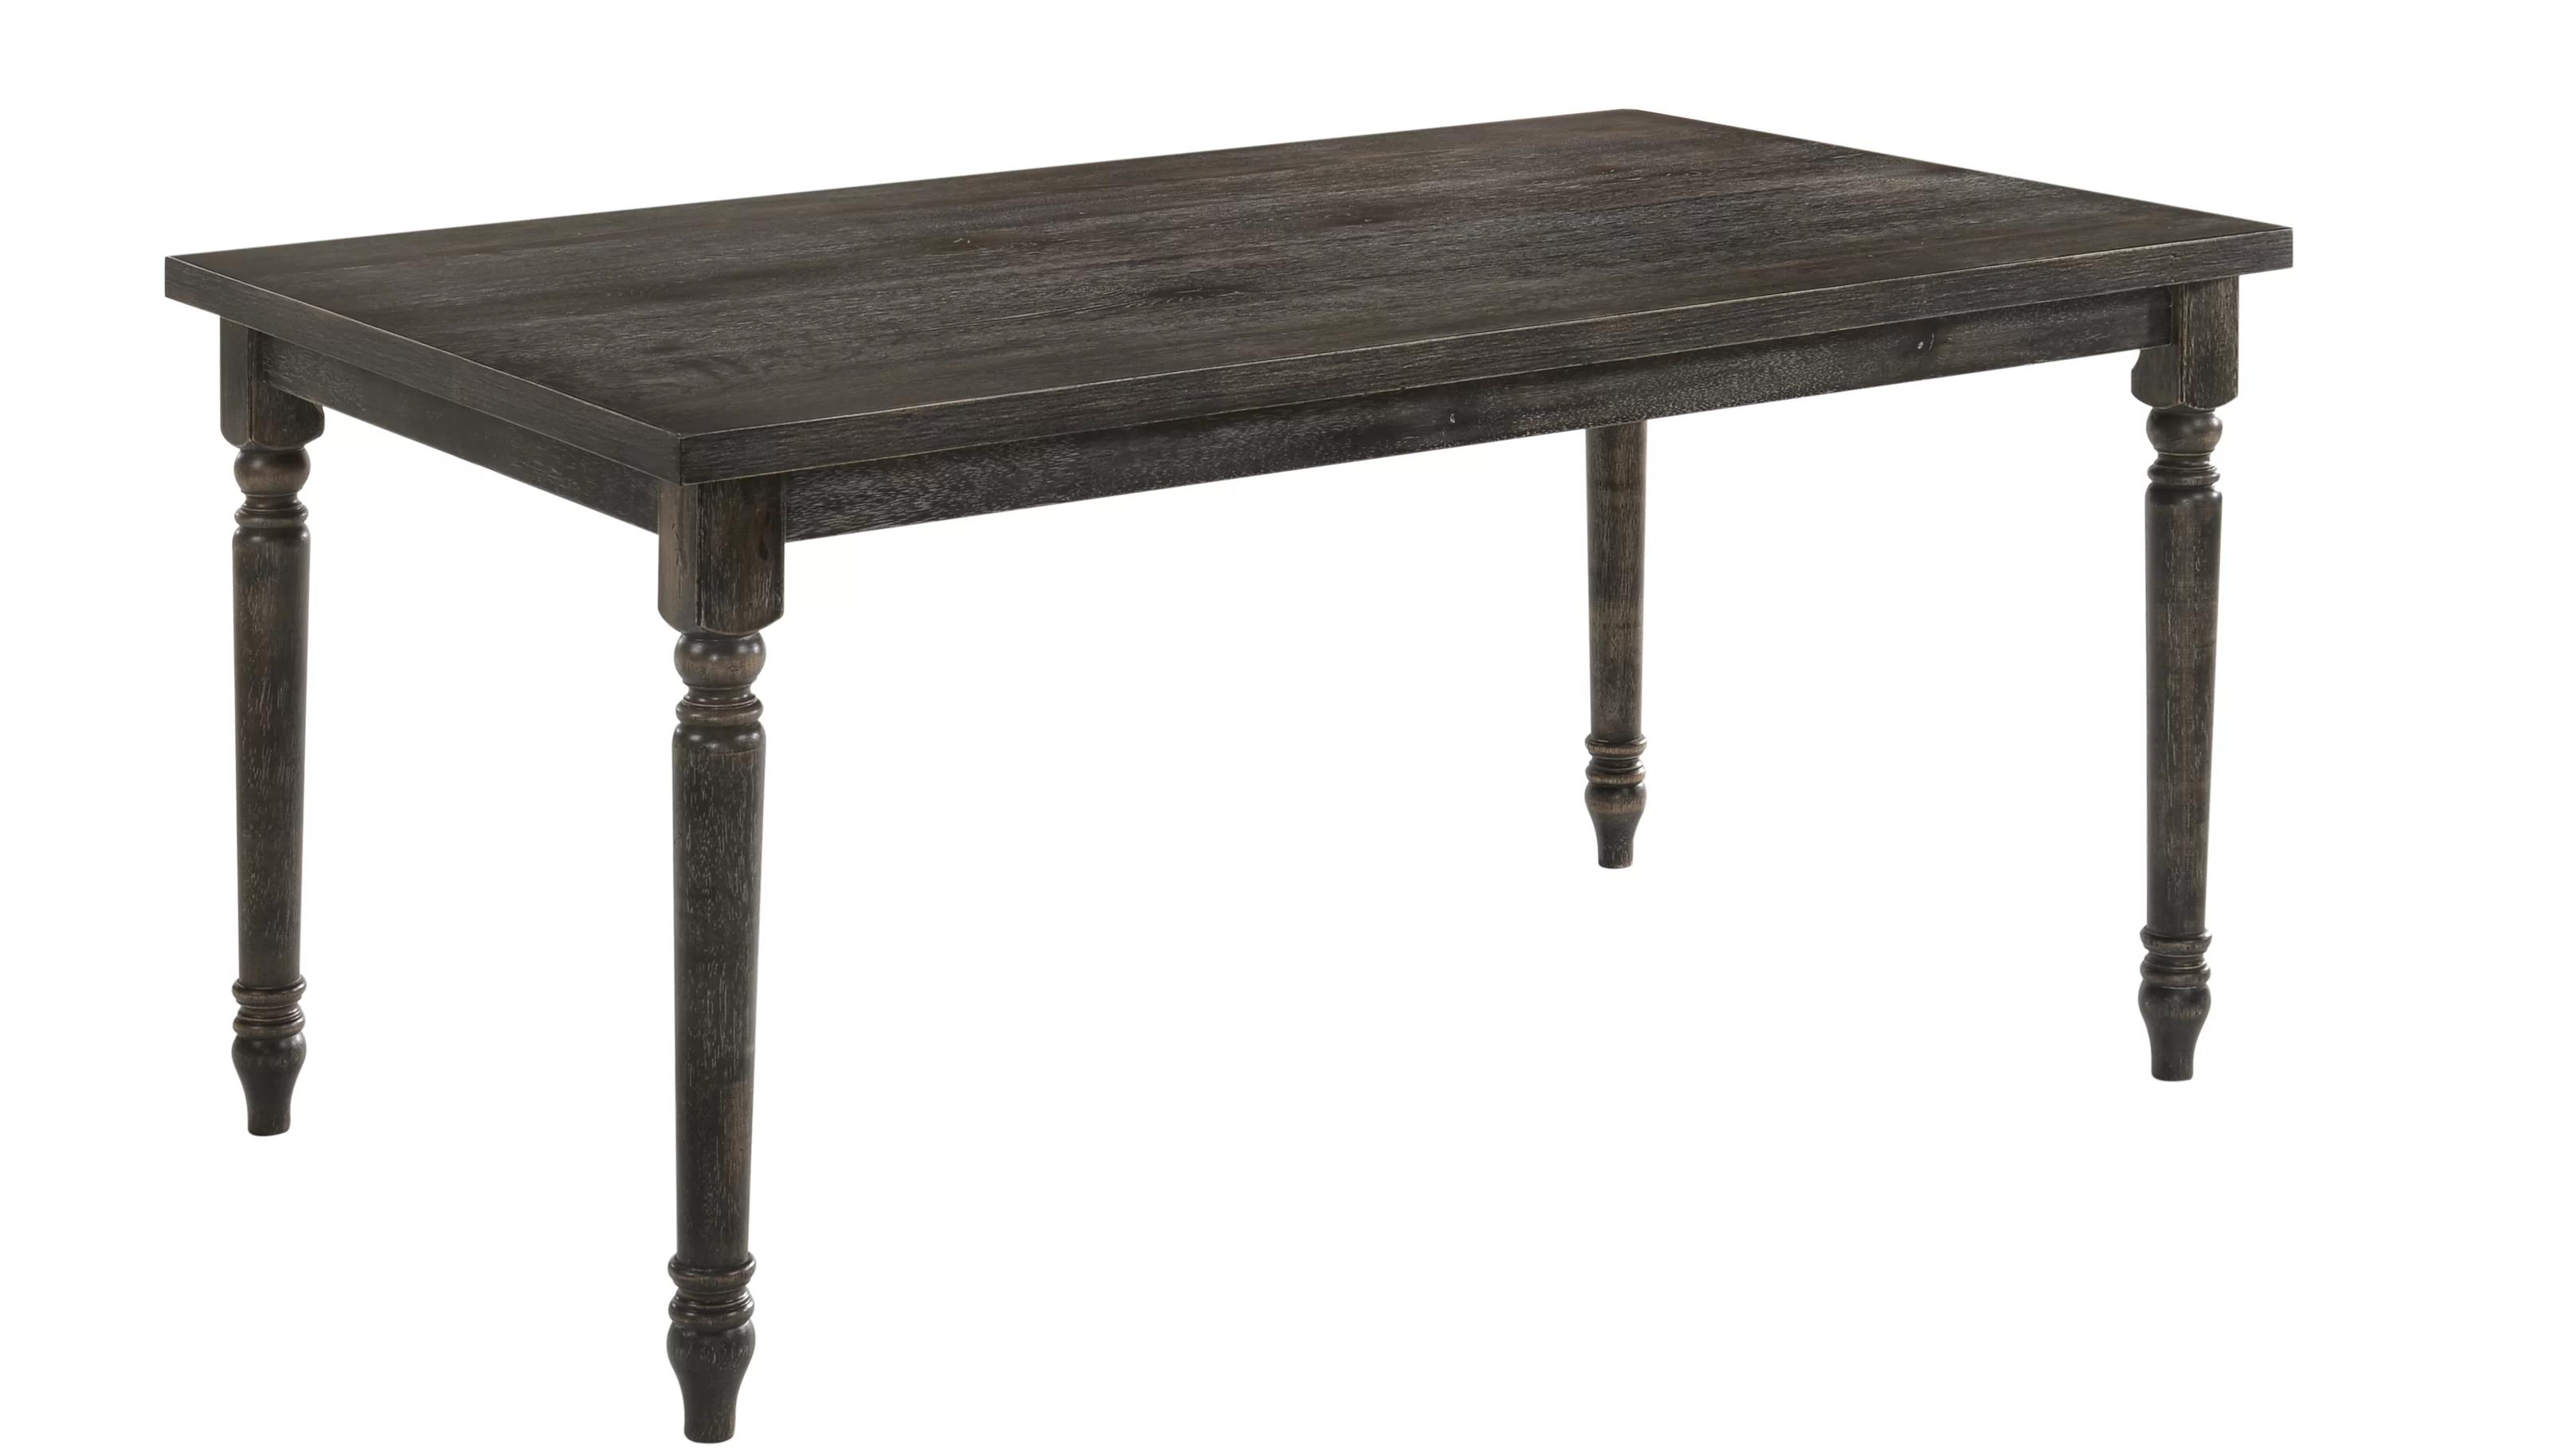 Classic, Rustic Dining Table Claudia II 71880 in Gray 